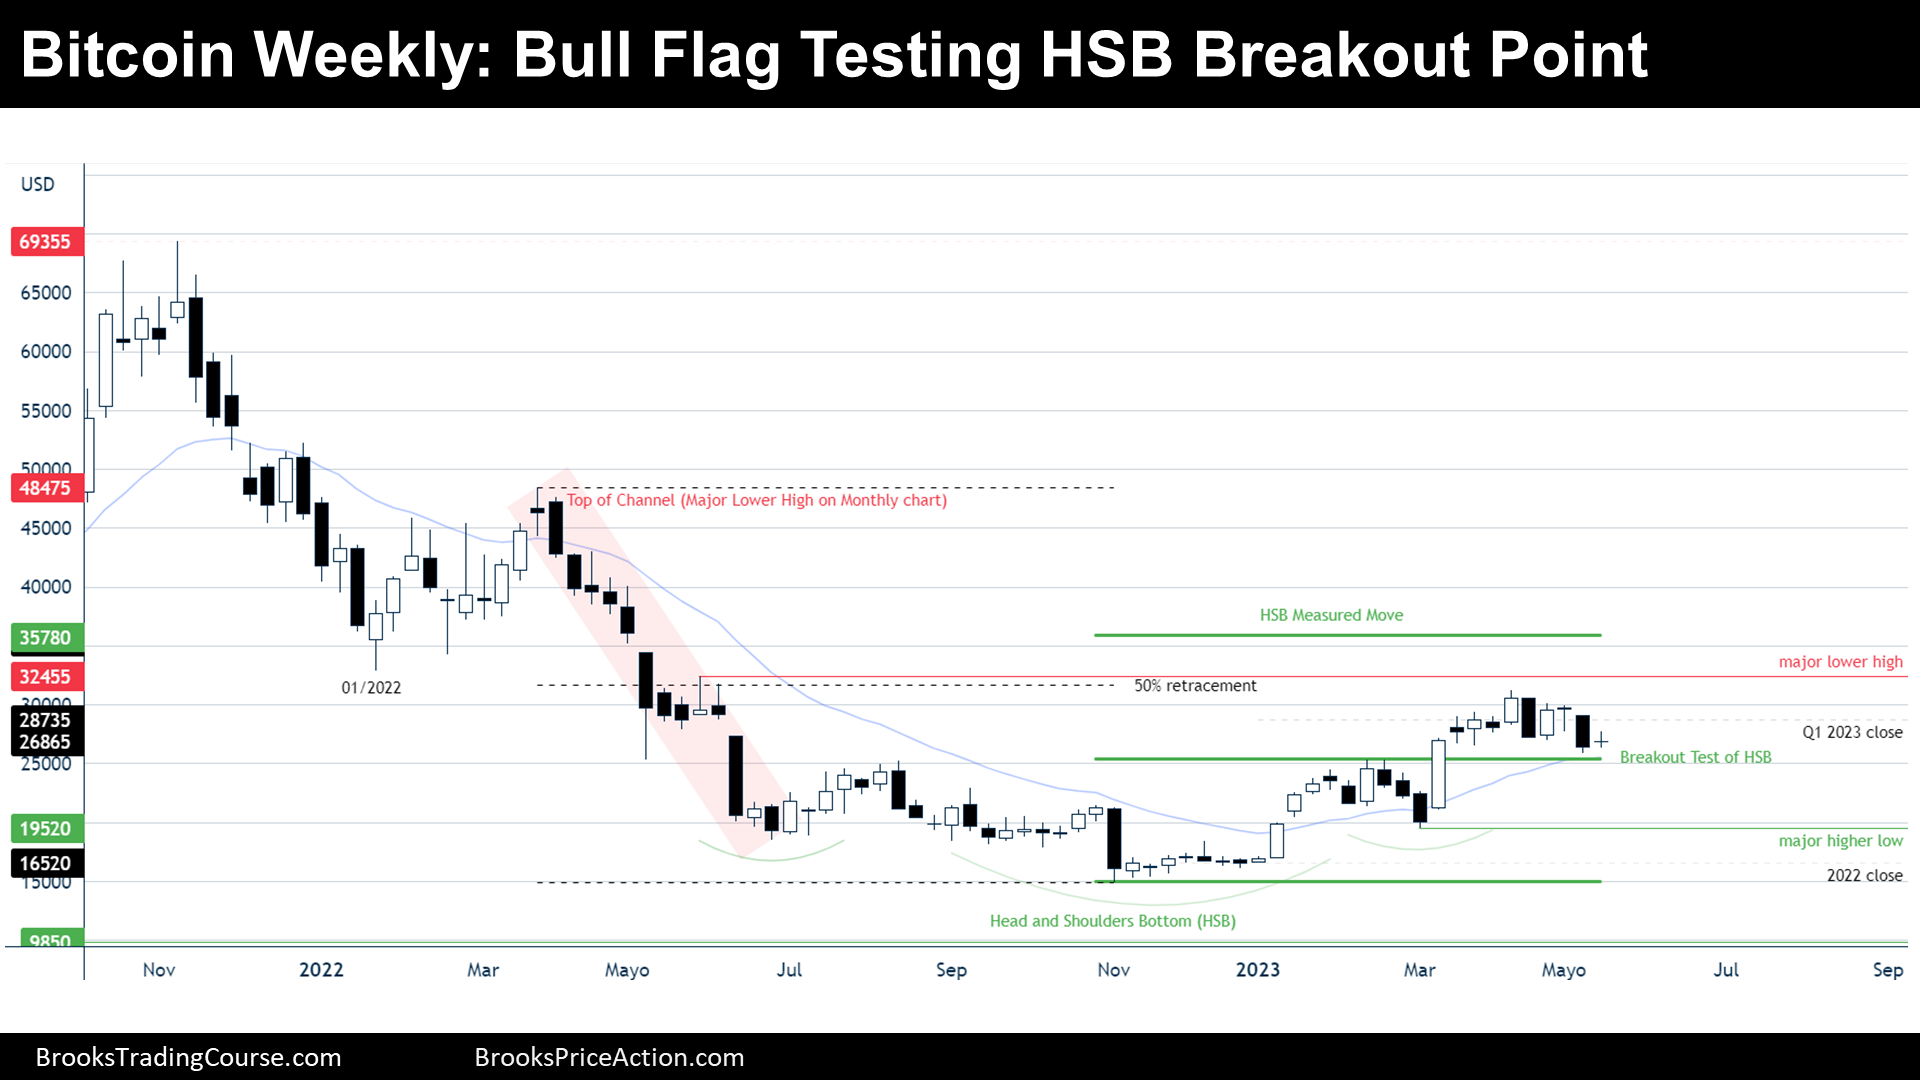 Bitcoin weekly Bull Flag and HSB Breakout Point Test